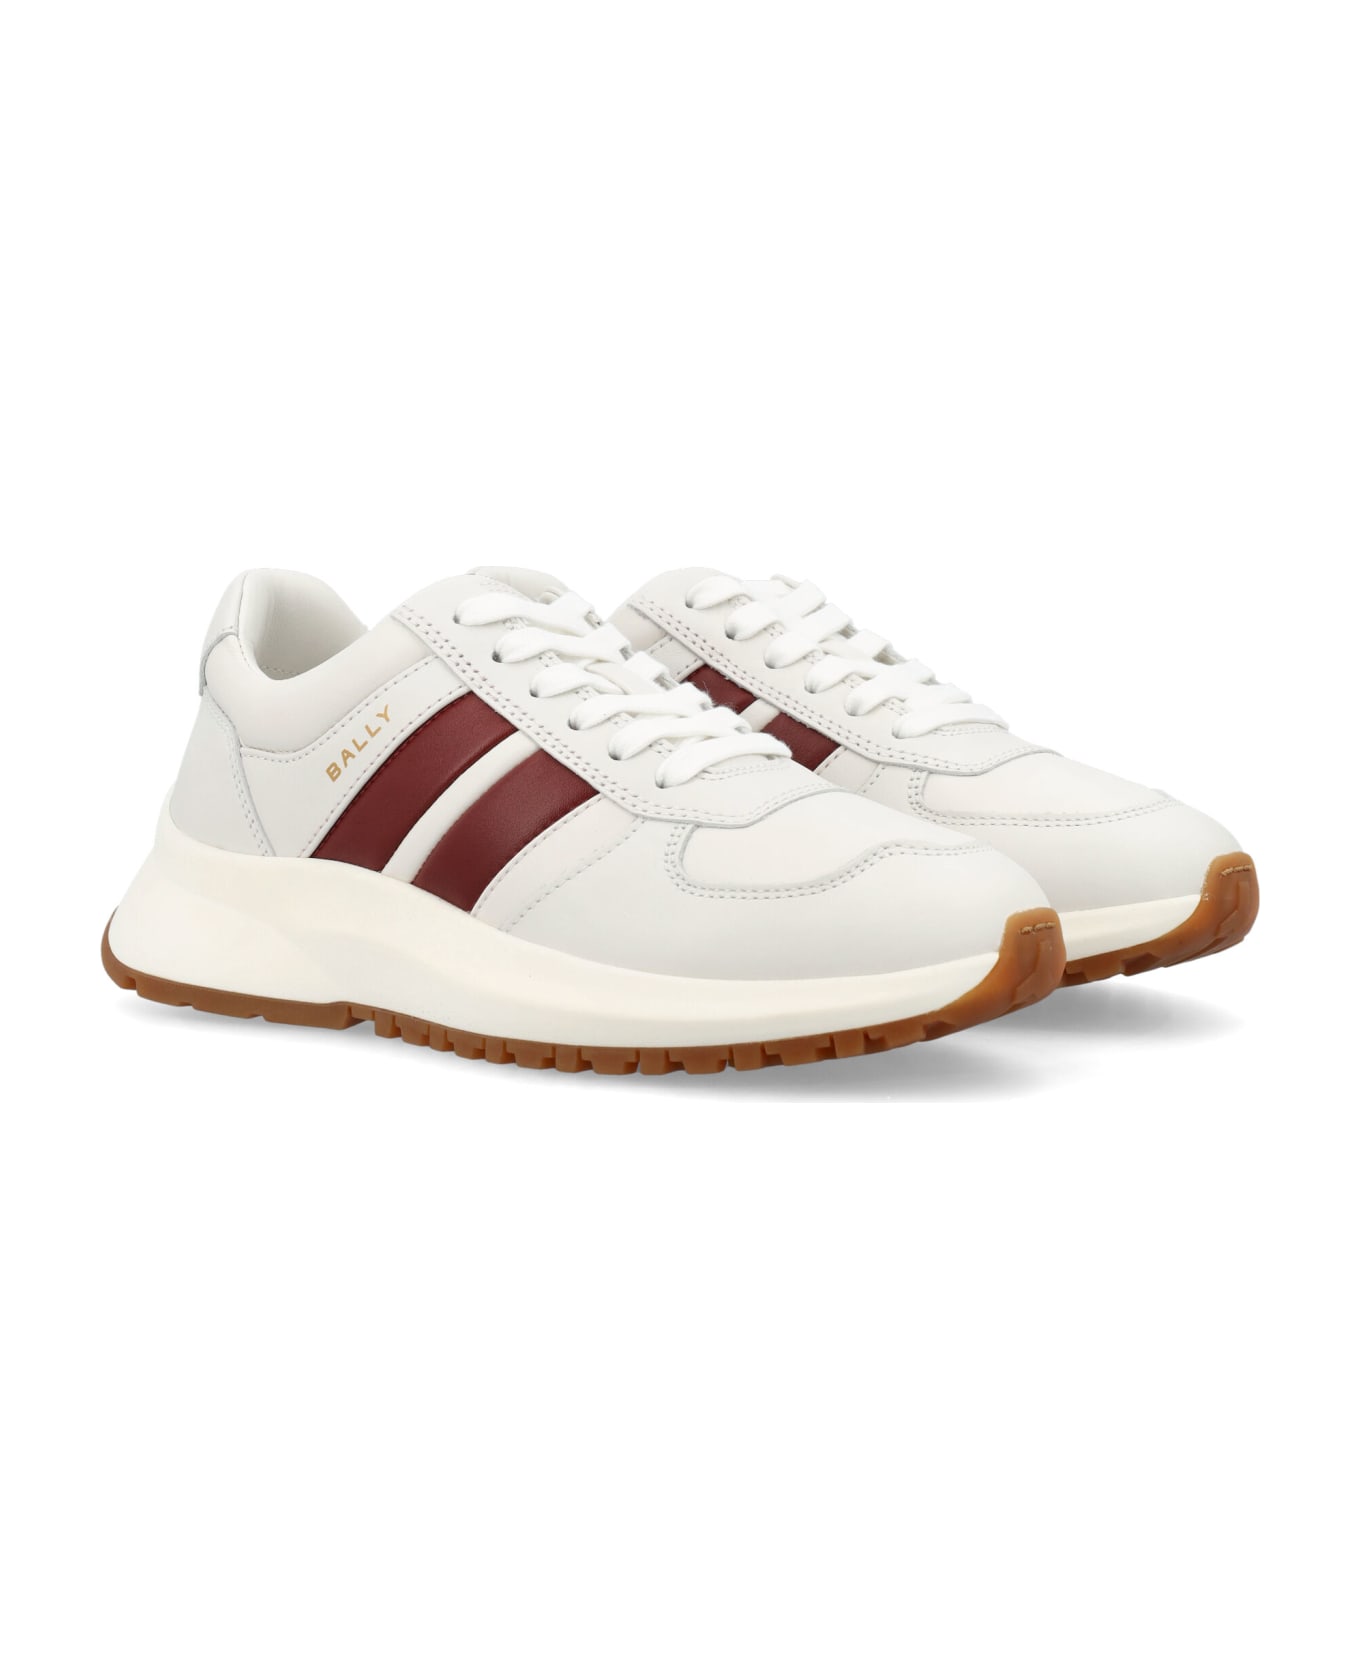 Bally Darsyl-w Leather Woman Sneakers - WHITE/B.RED/WHITE スニーカー